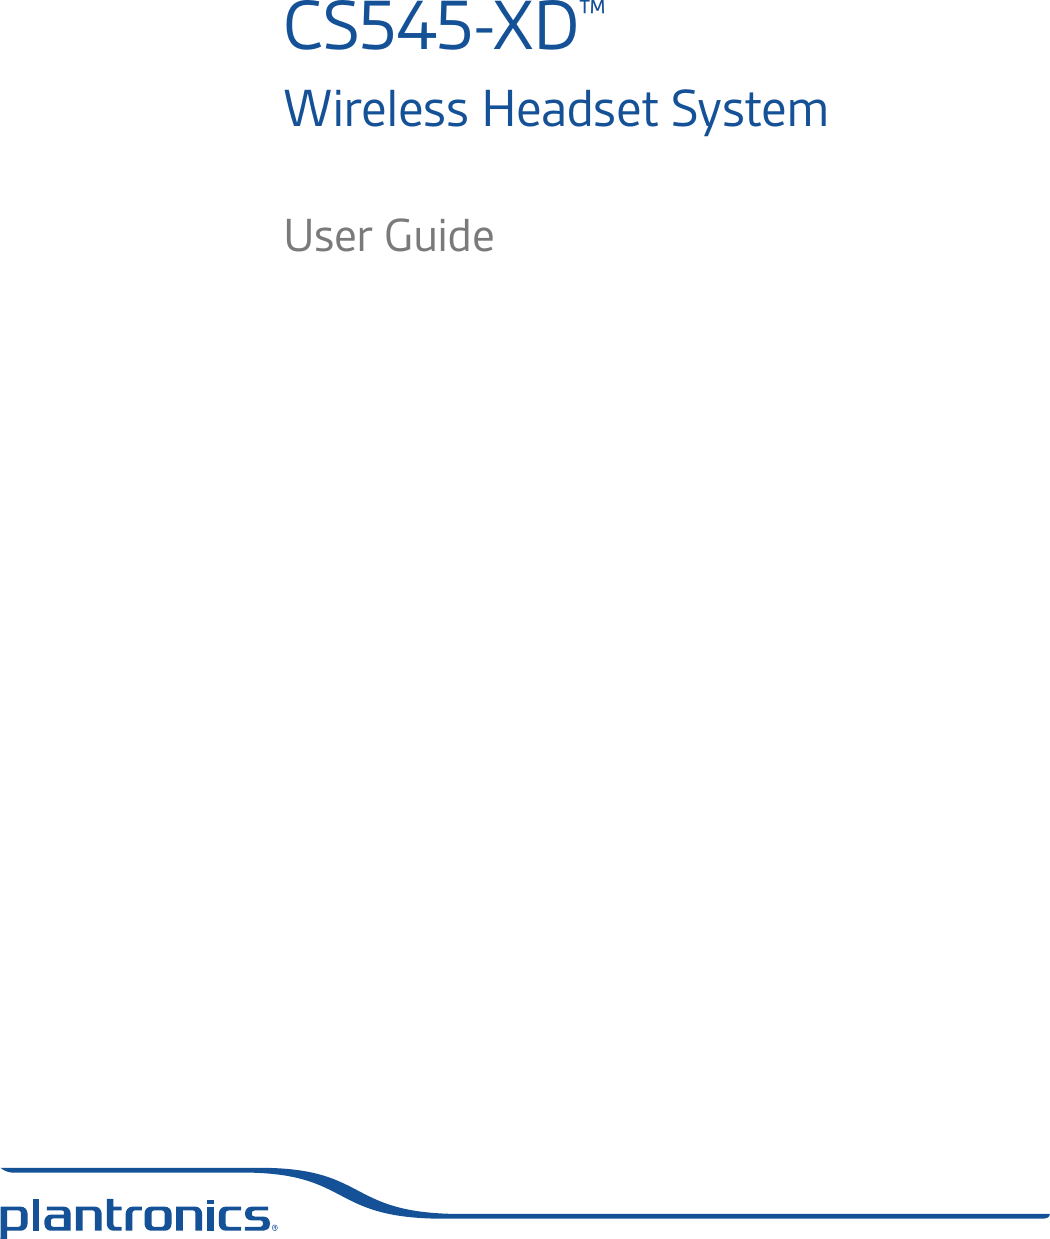 CS545-XD™ Wireless Headset SystemUser Guide